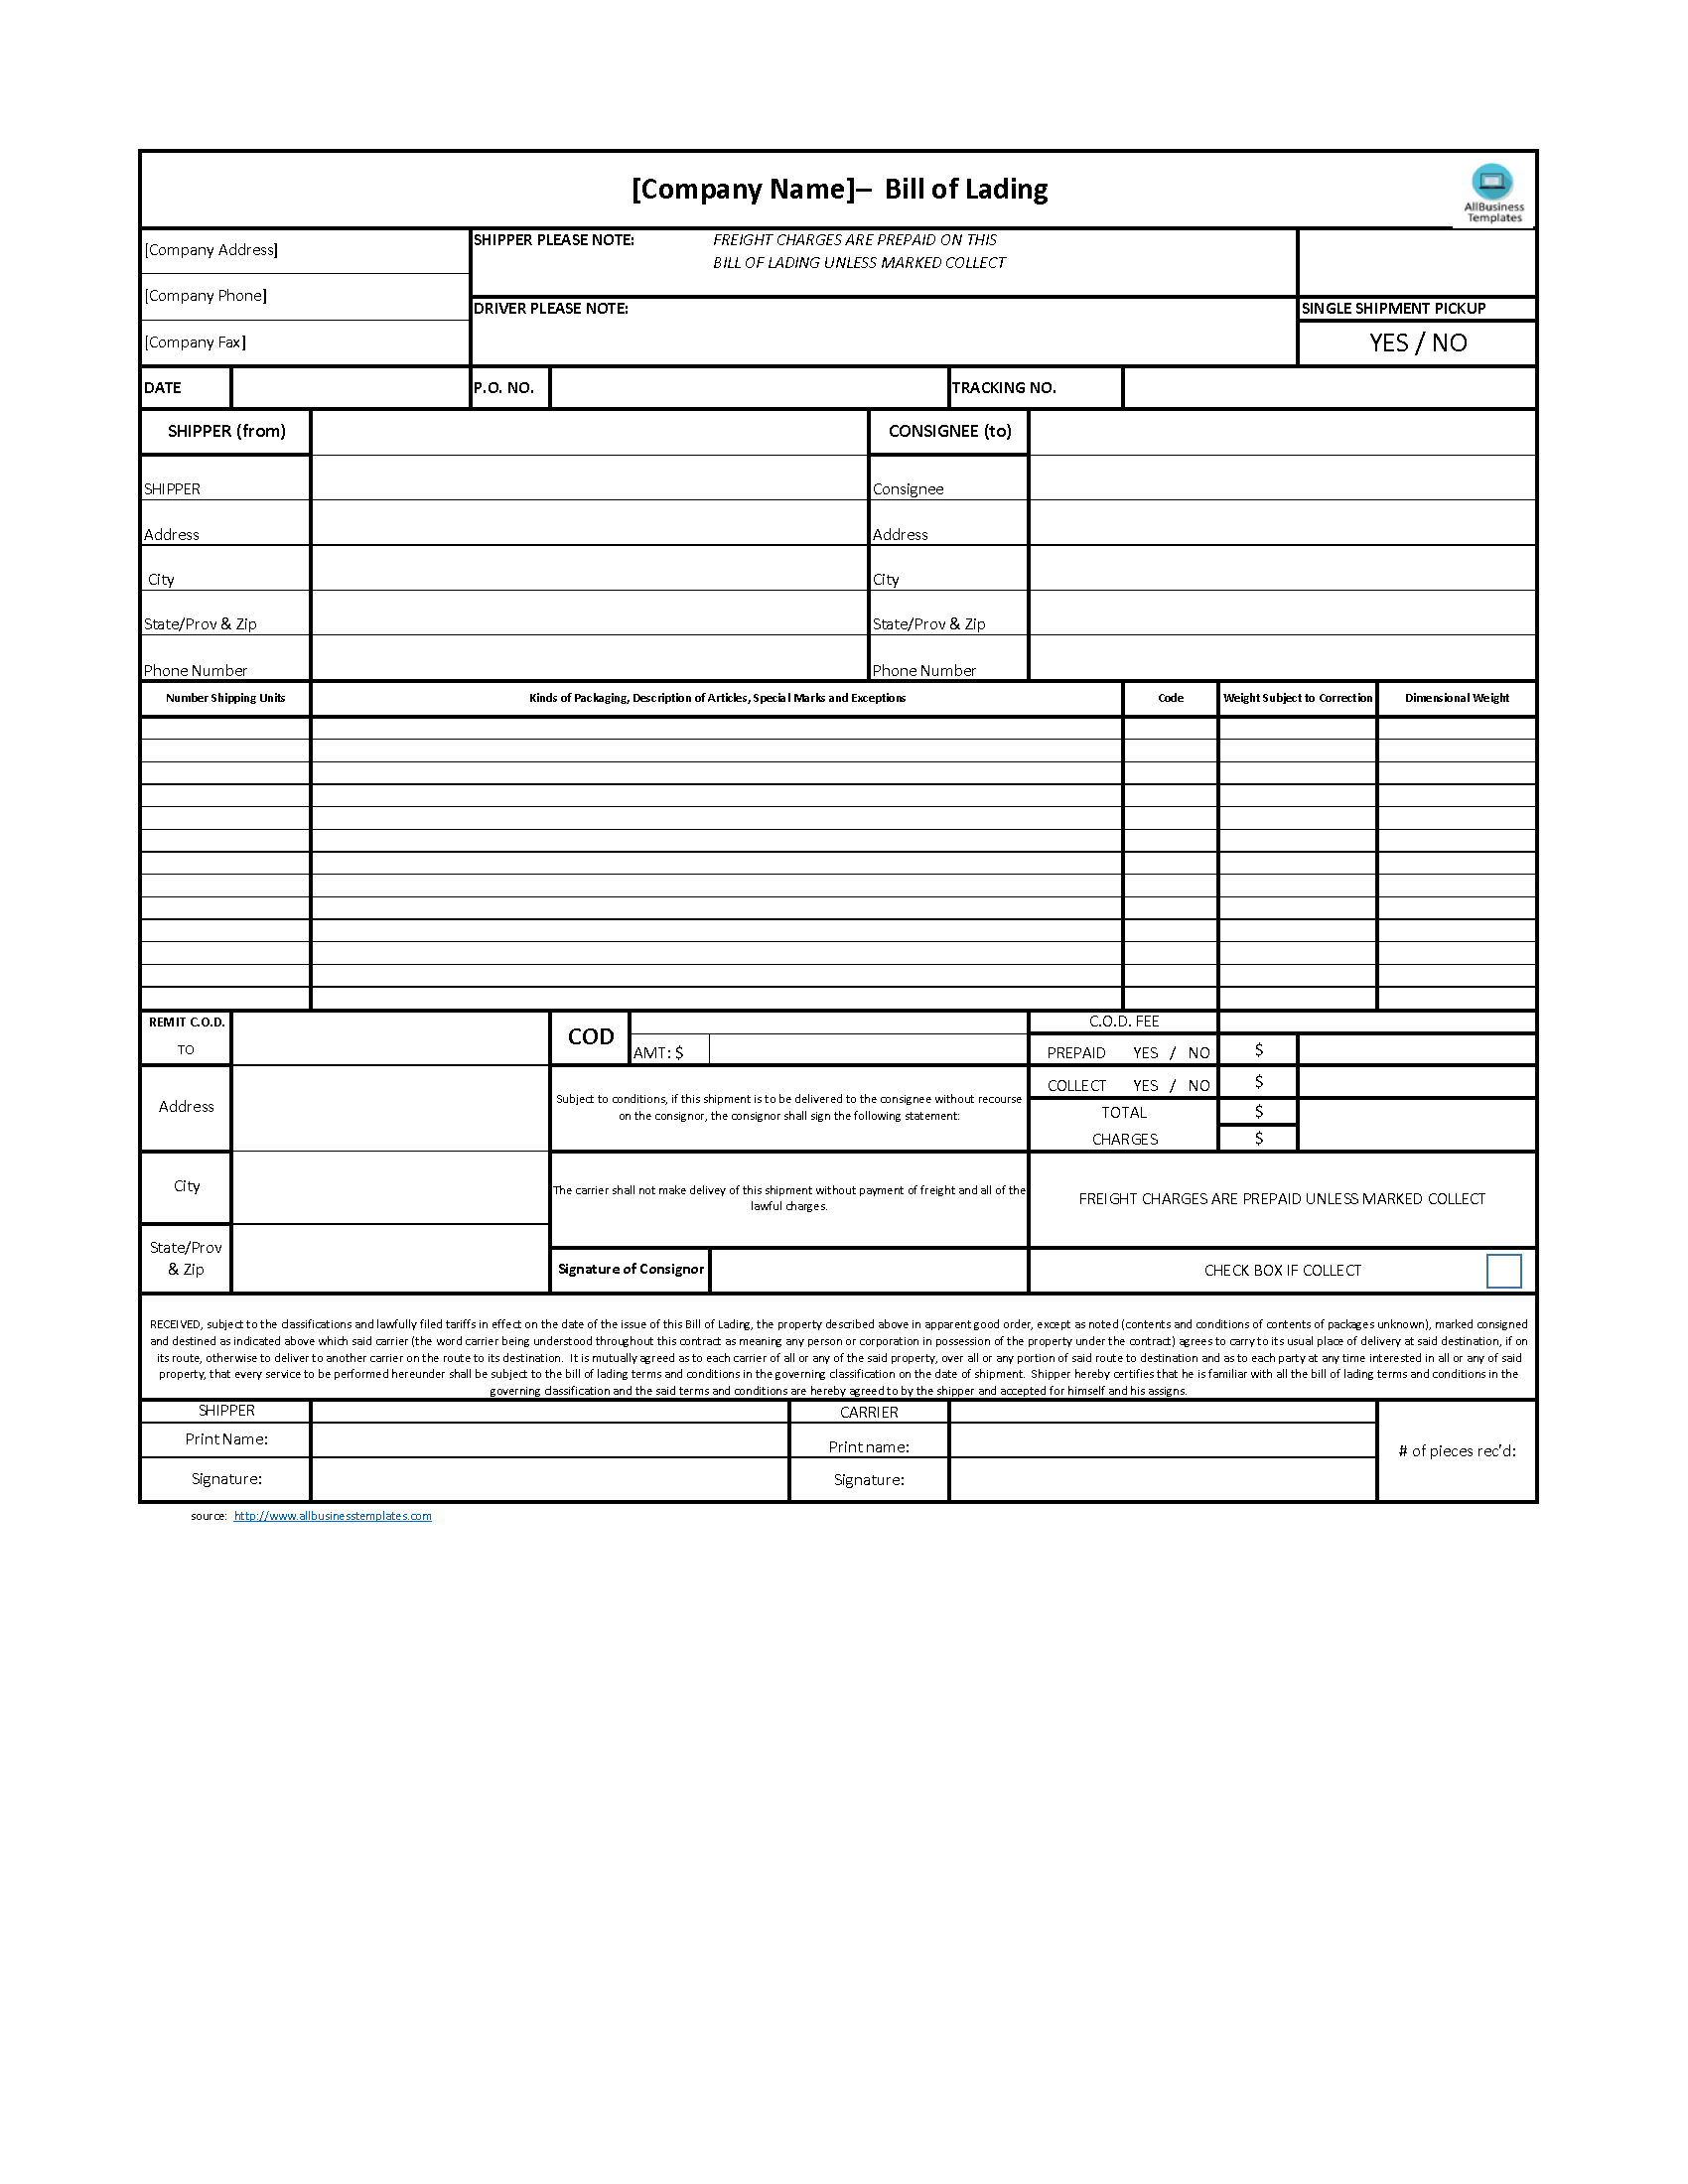 Bill of Lading Excel Template Templates at allbusinesstemplates com